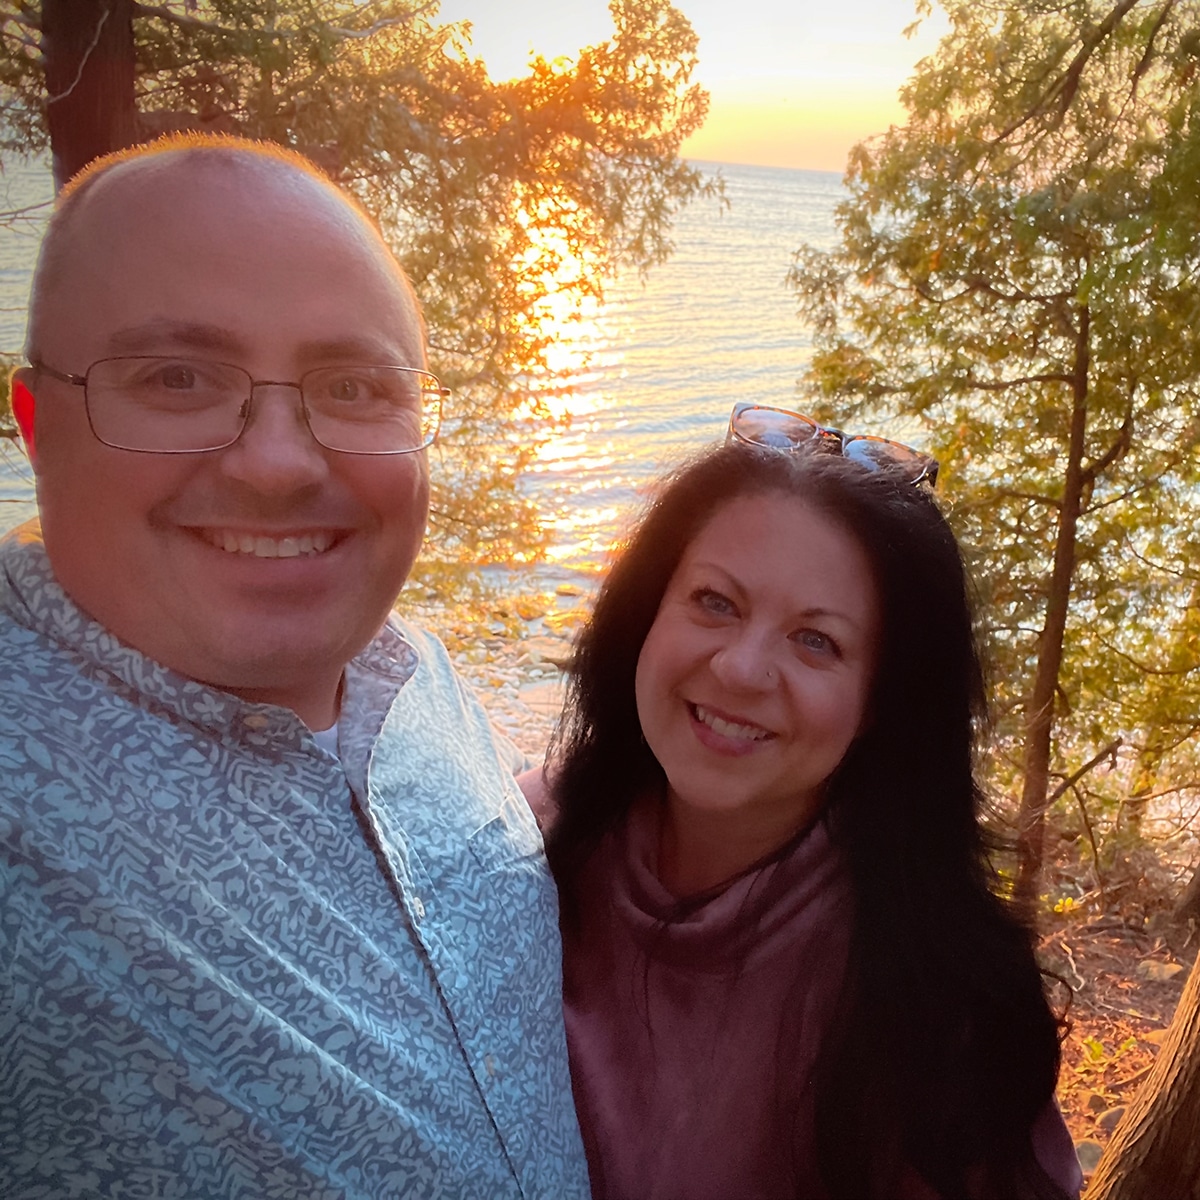 Steve and Rebecca Blackwell standing on the coast of Door County with the sun setting over the water behind them.